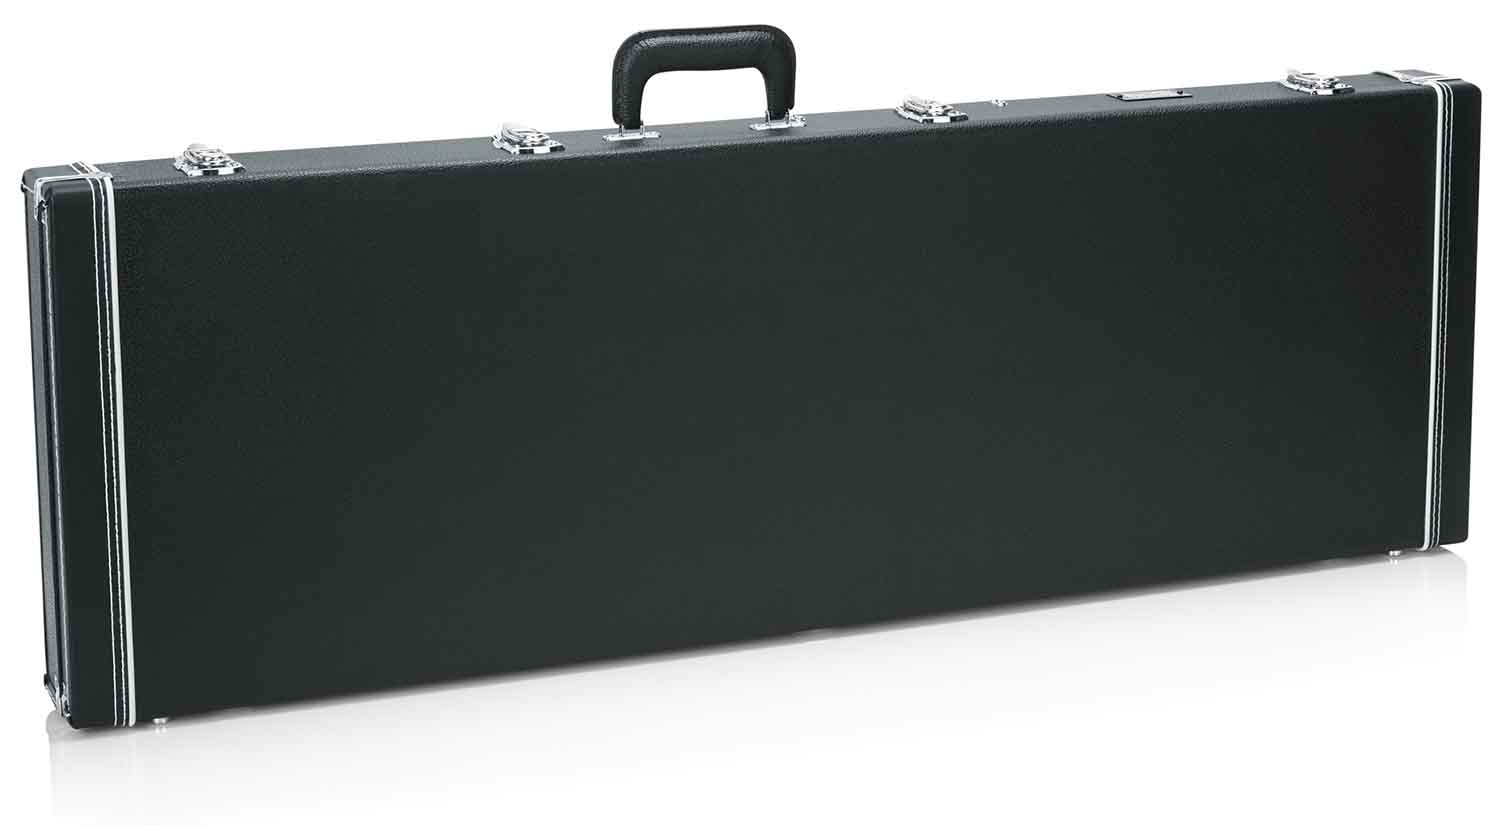 Gator Cases GW-BASS Deluxe Wood Case for Bass Guitars - Hollywood DJ